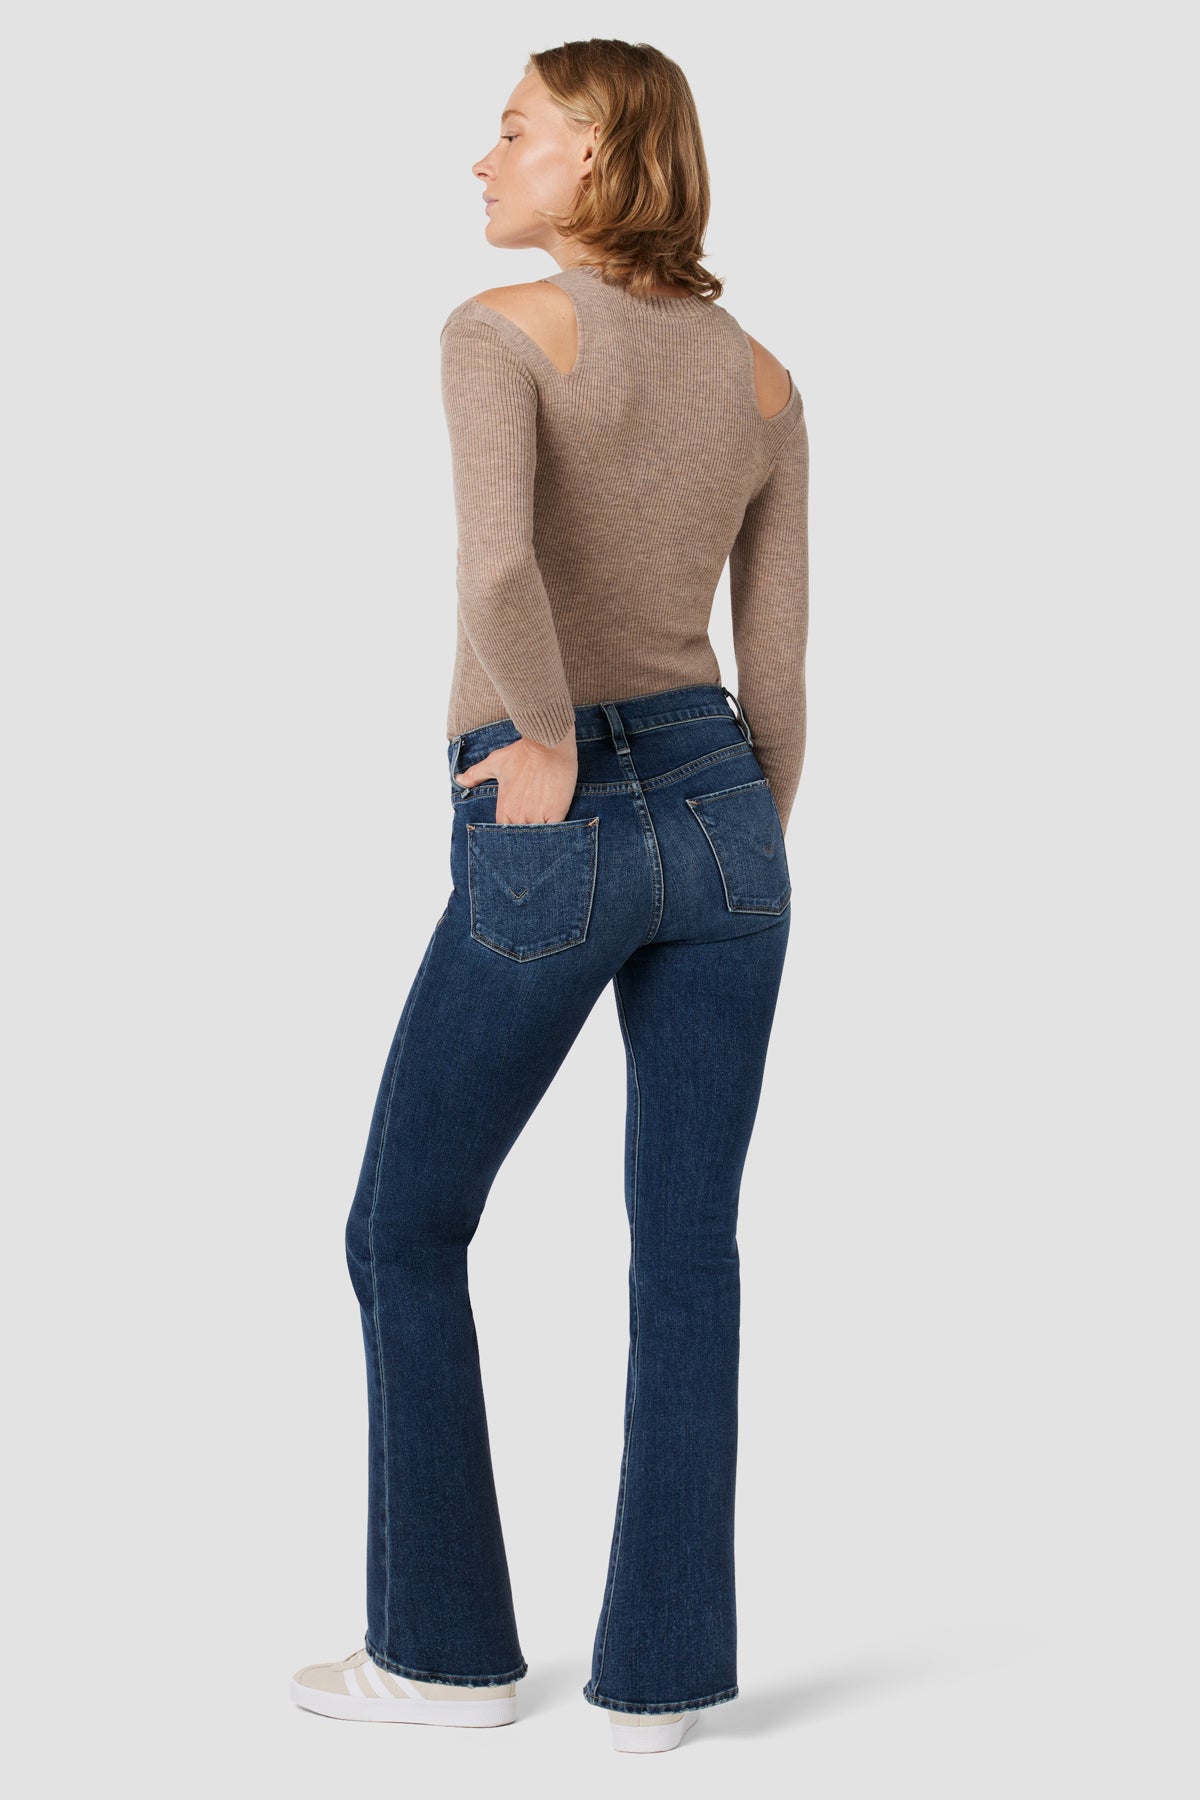 Nico Mid-Rise Bootcut Barefoot Jean